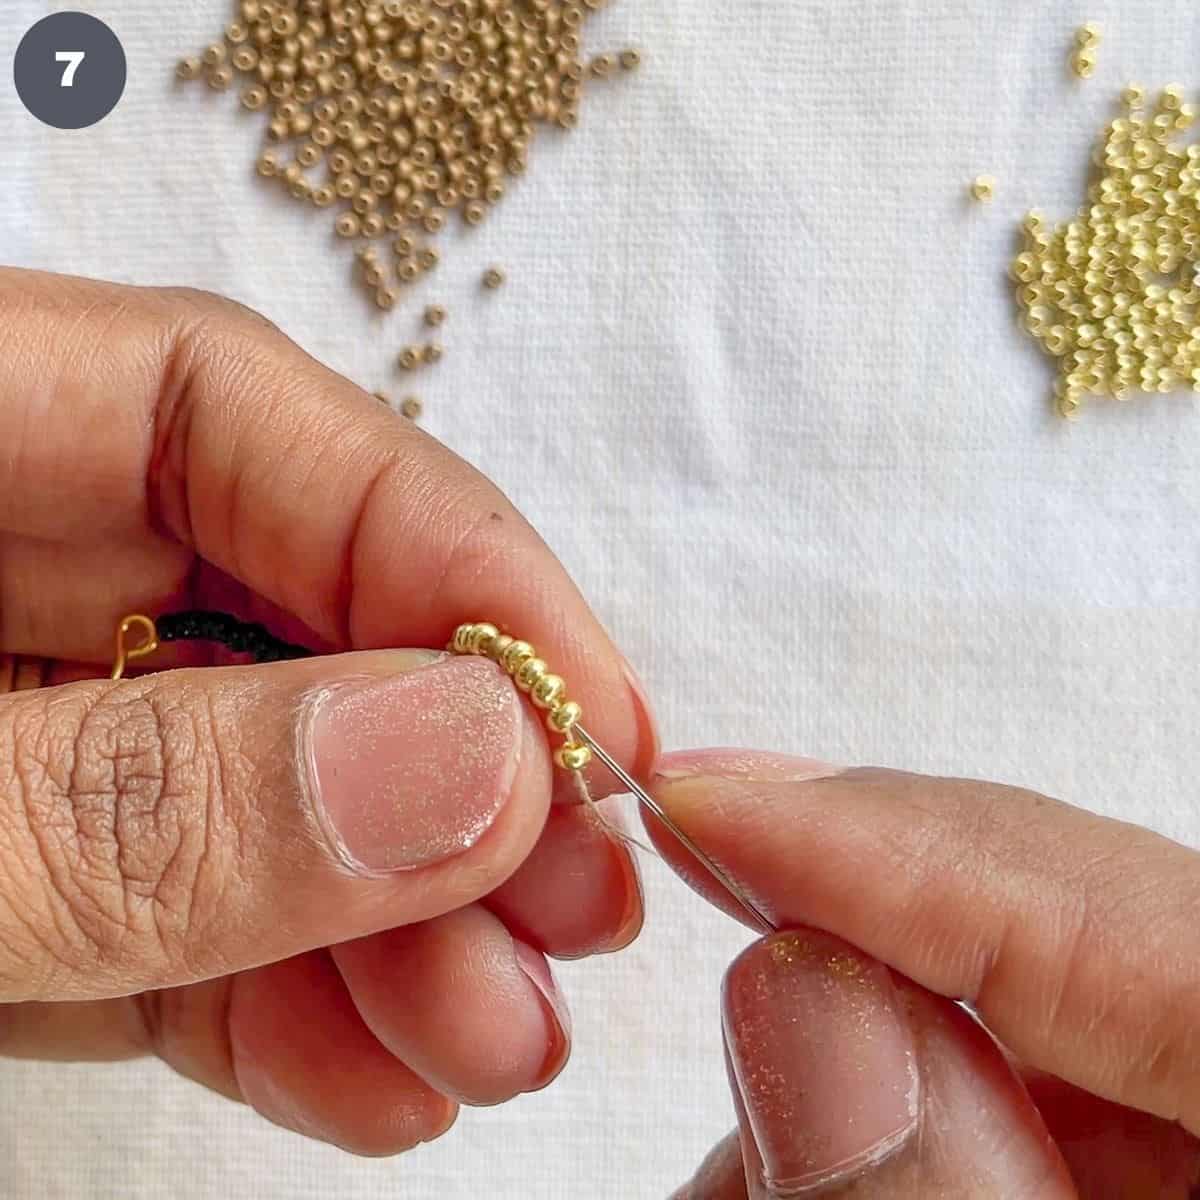 Inserting needle into a strand of gold beads.